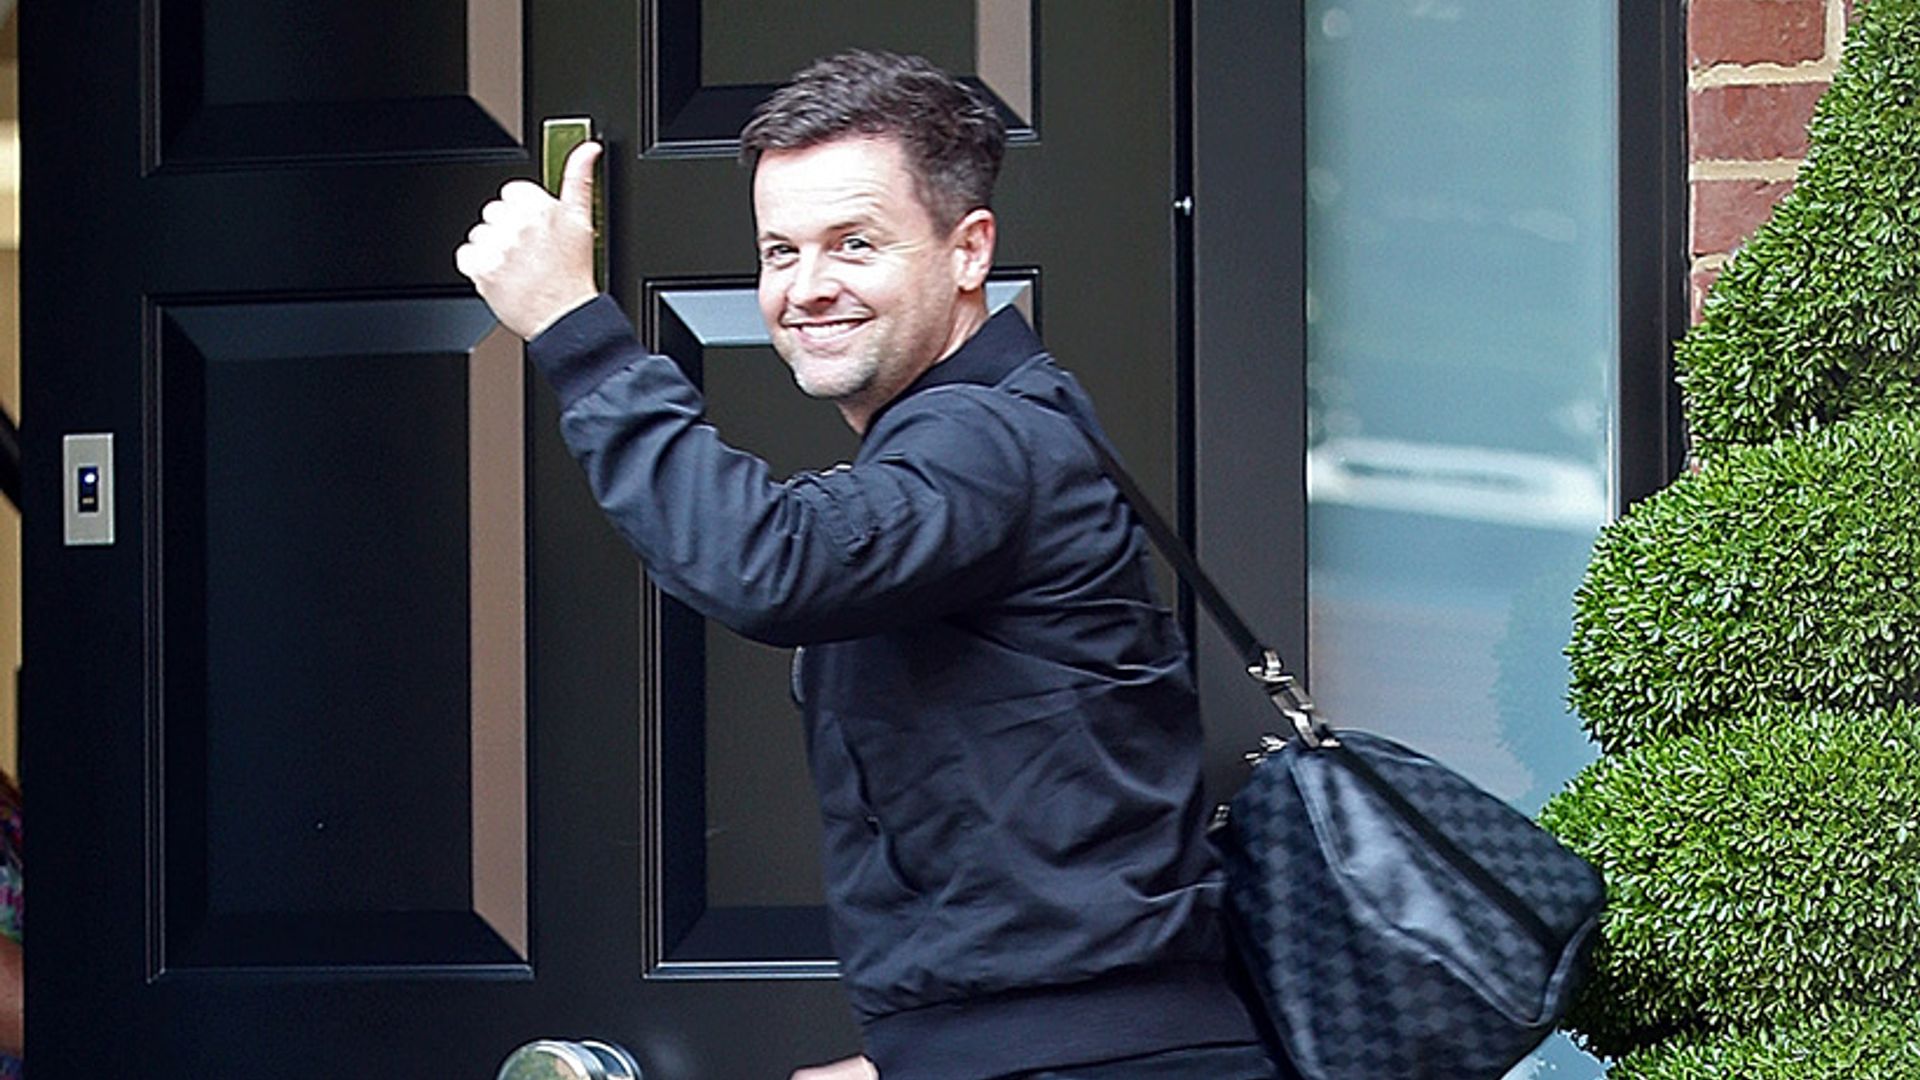 New dad Declan Donnelly is all smiles as he returns home after baby daughter's birth